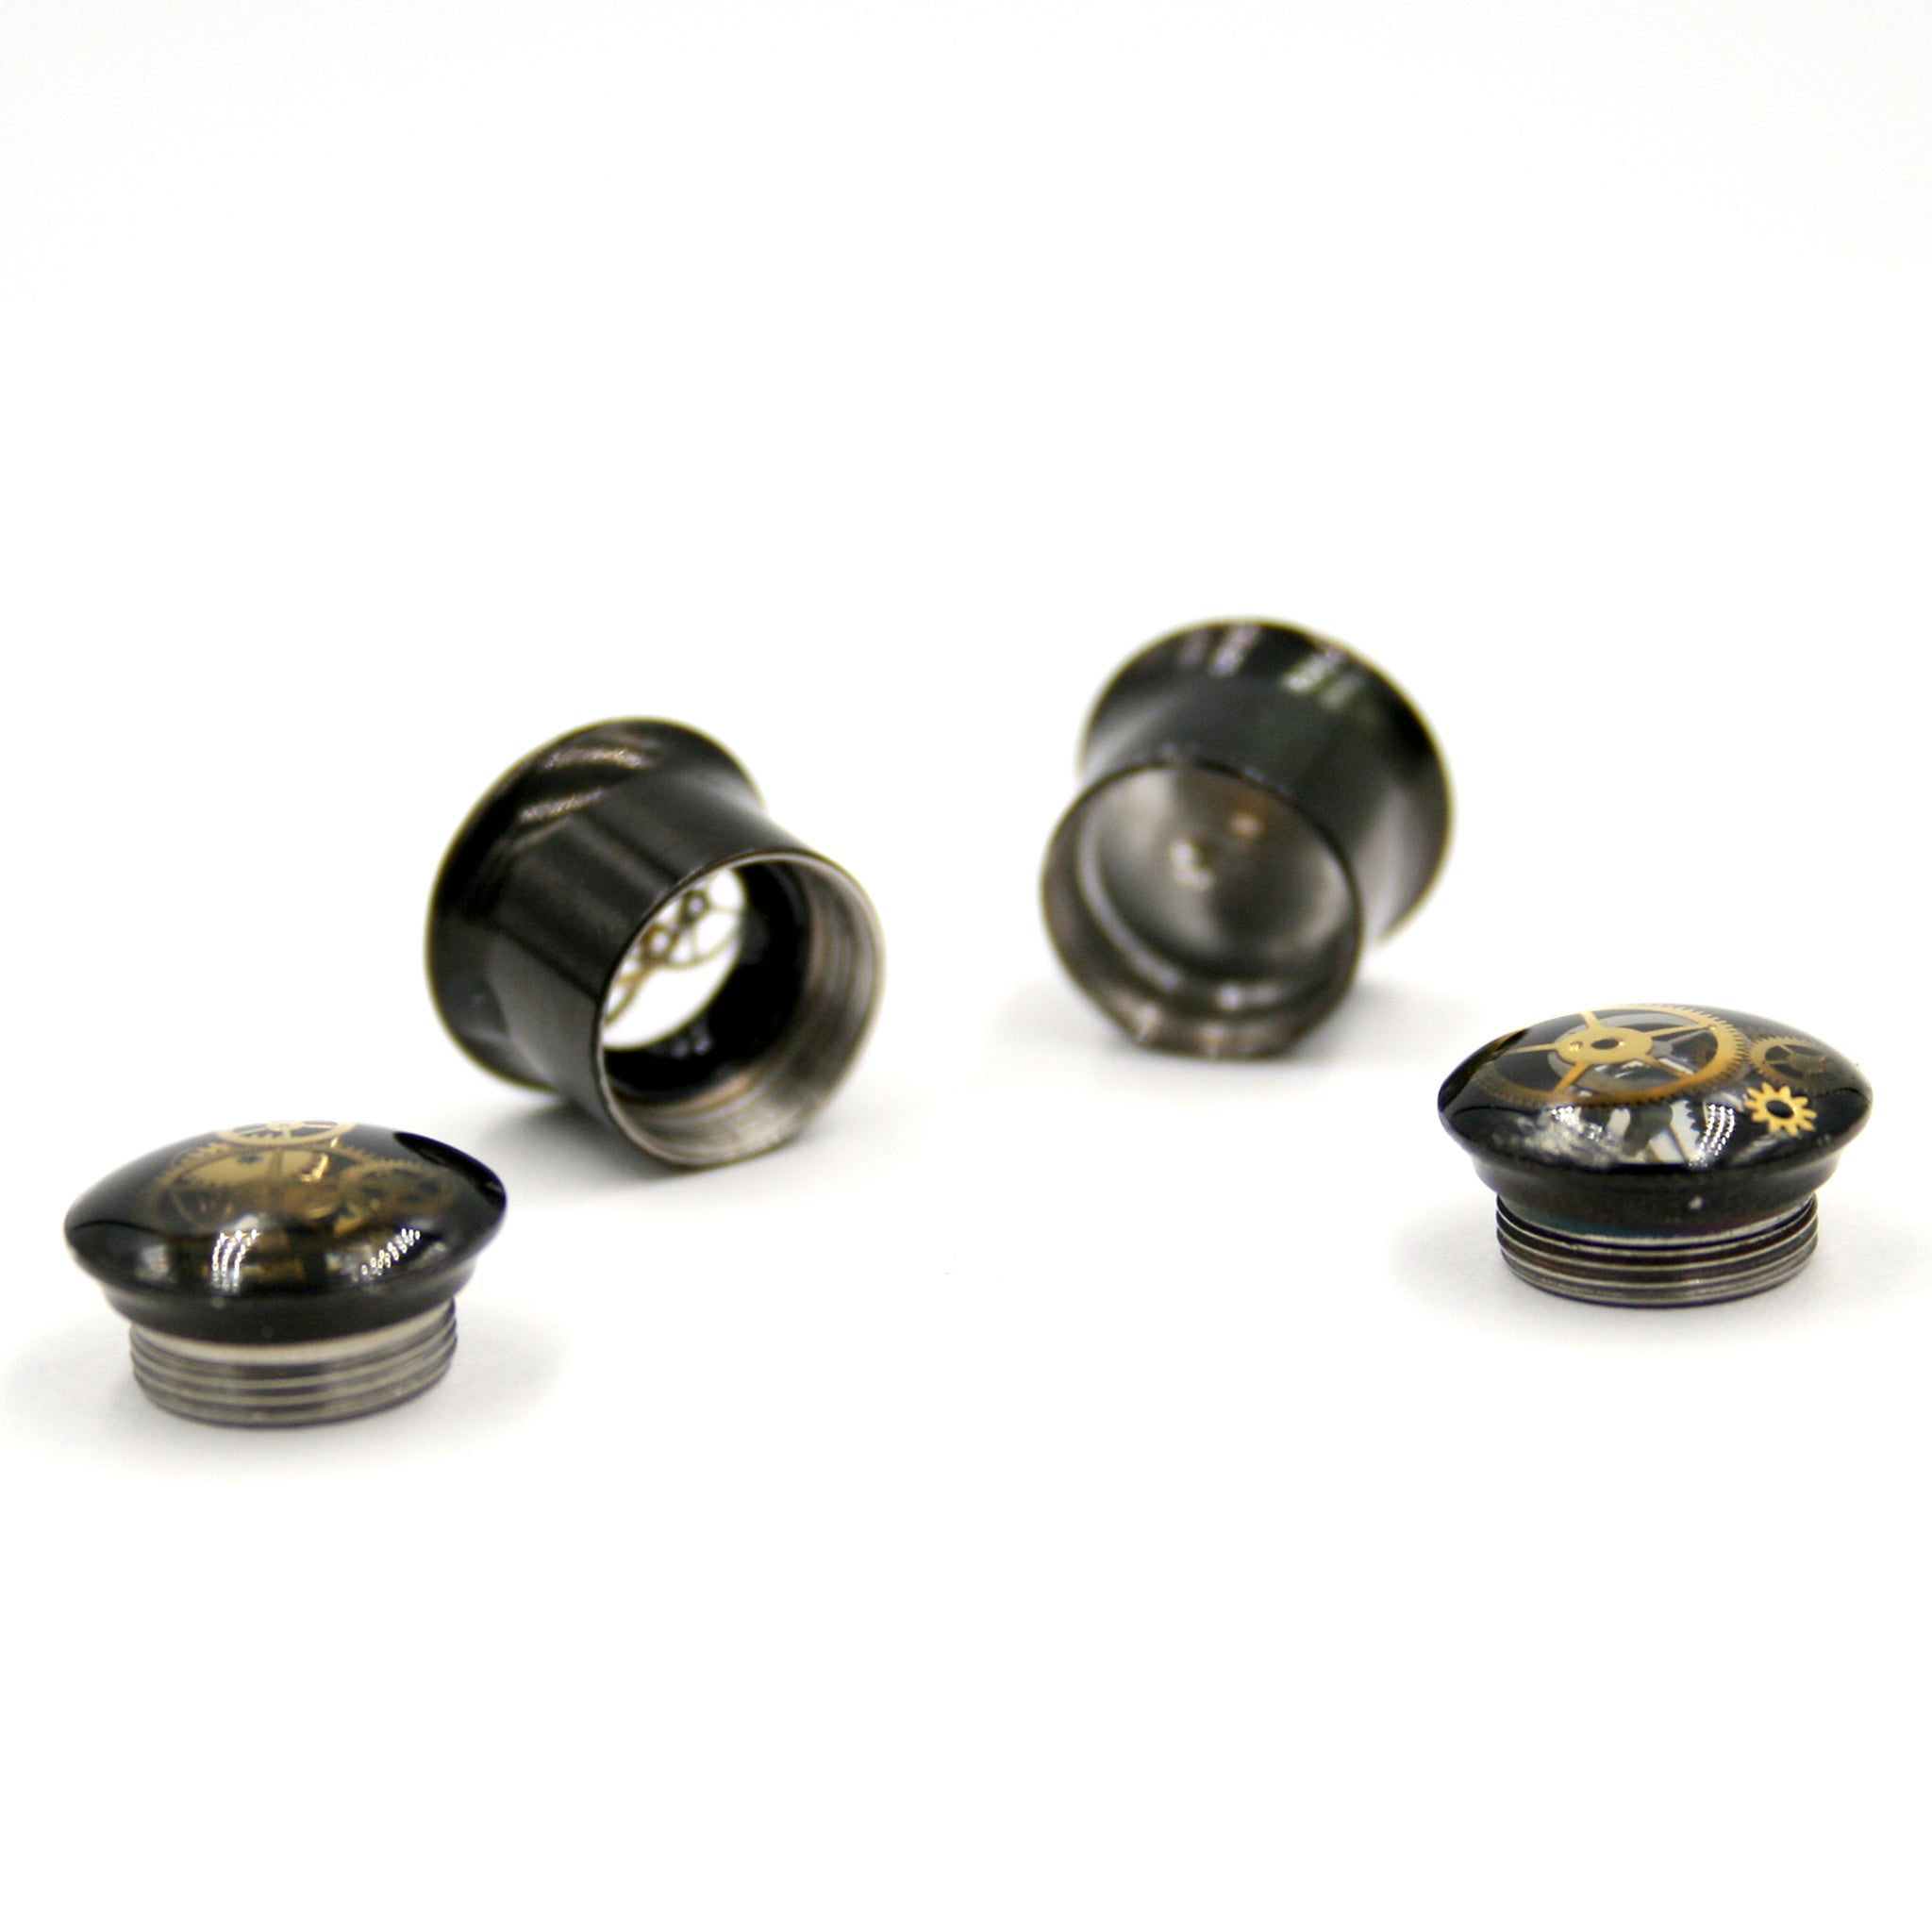 Cool 16mm ear gauges in steampunk style screw back for easy fit